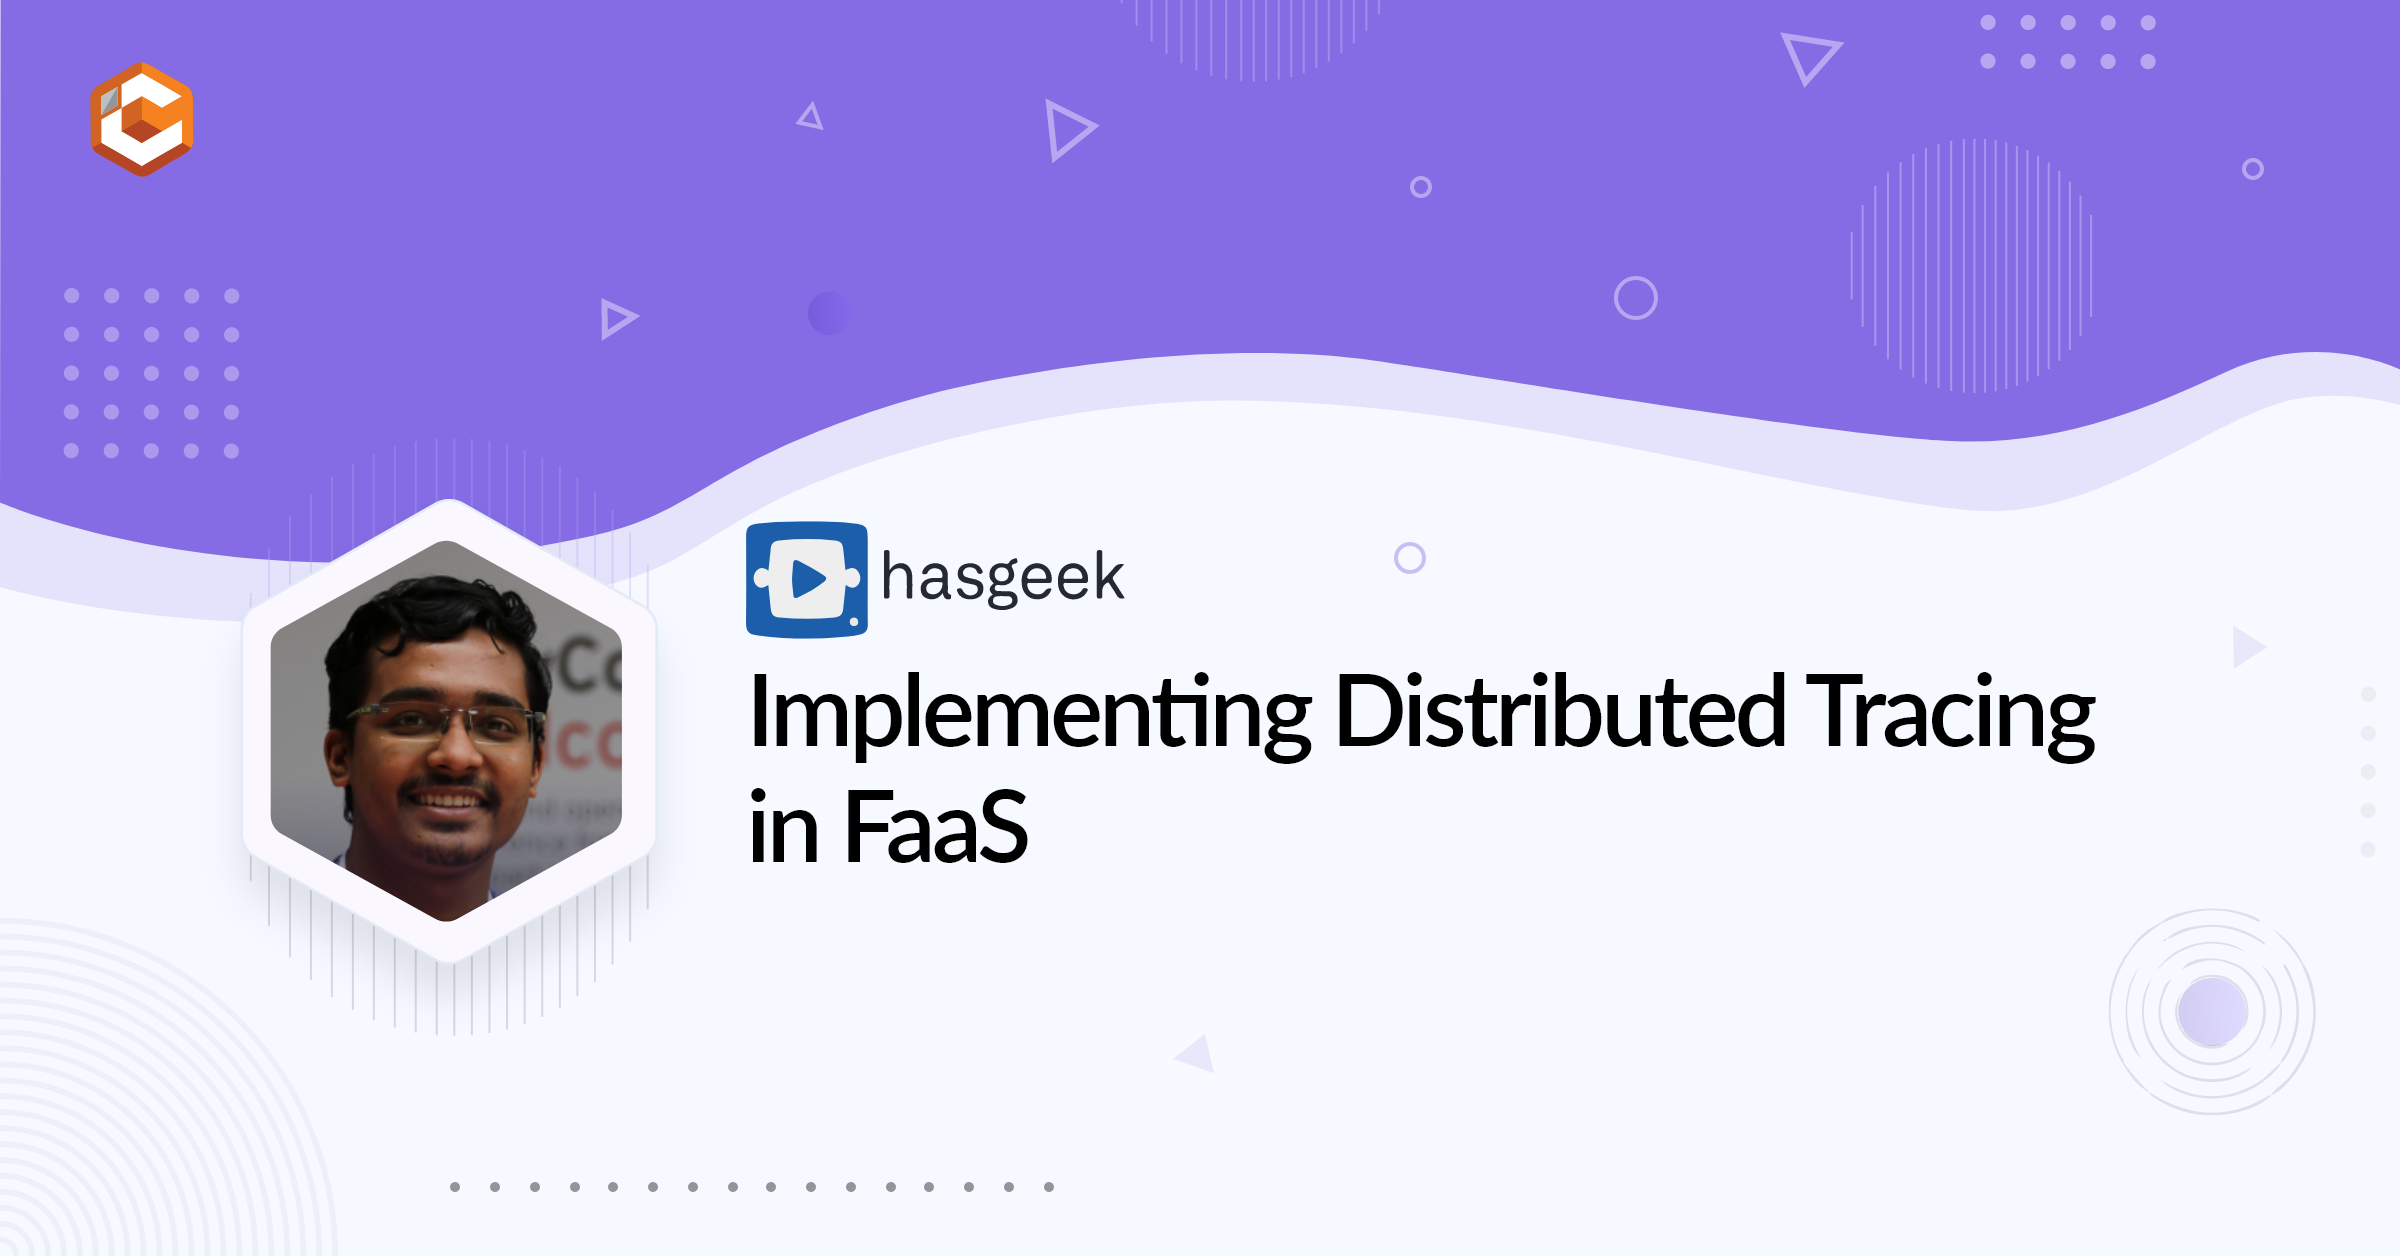 Implementing Distributed Tracing in FaaS